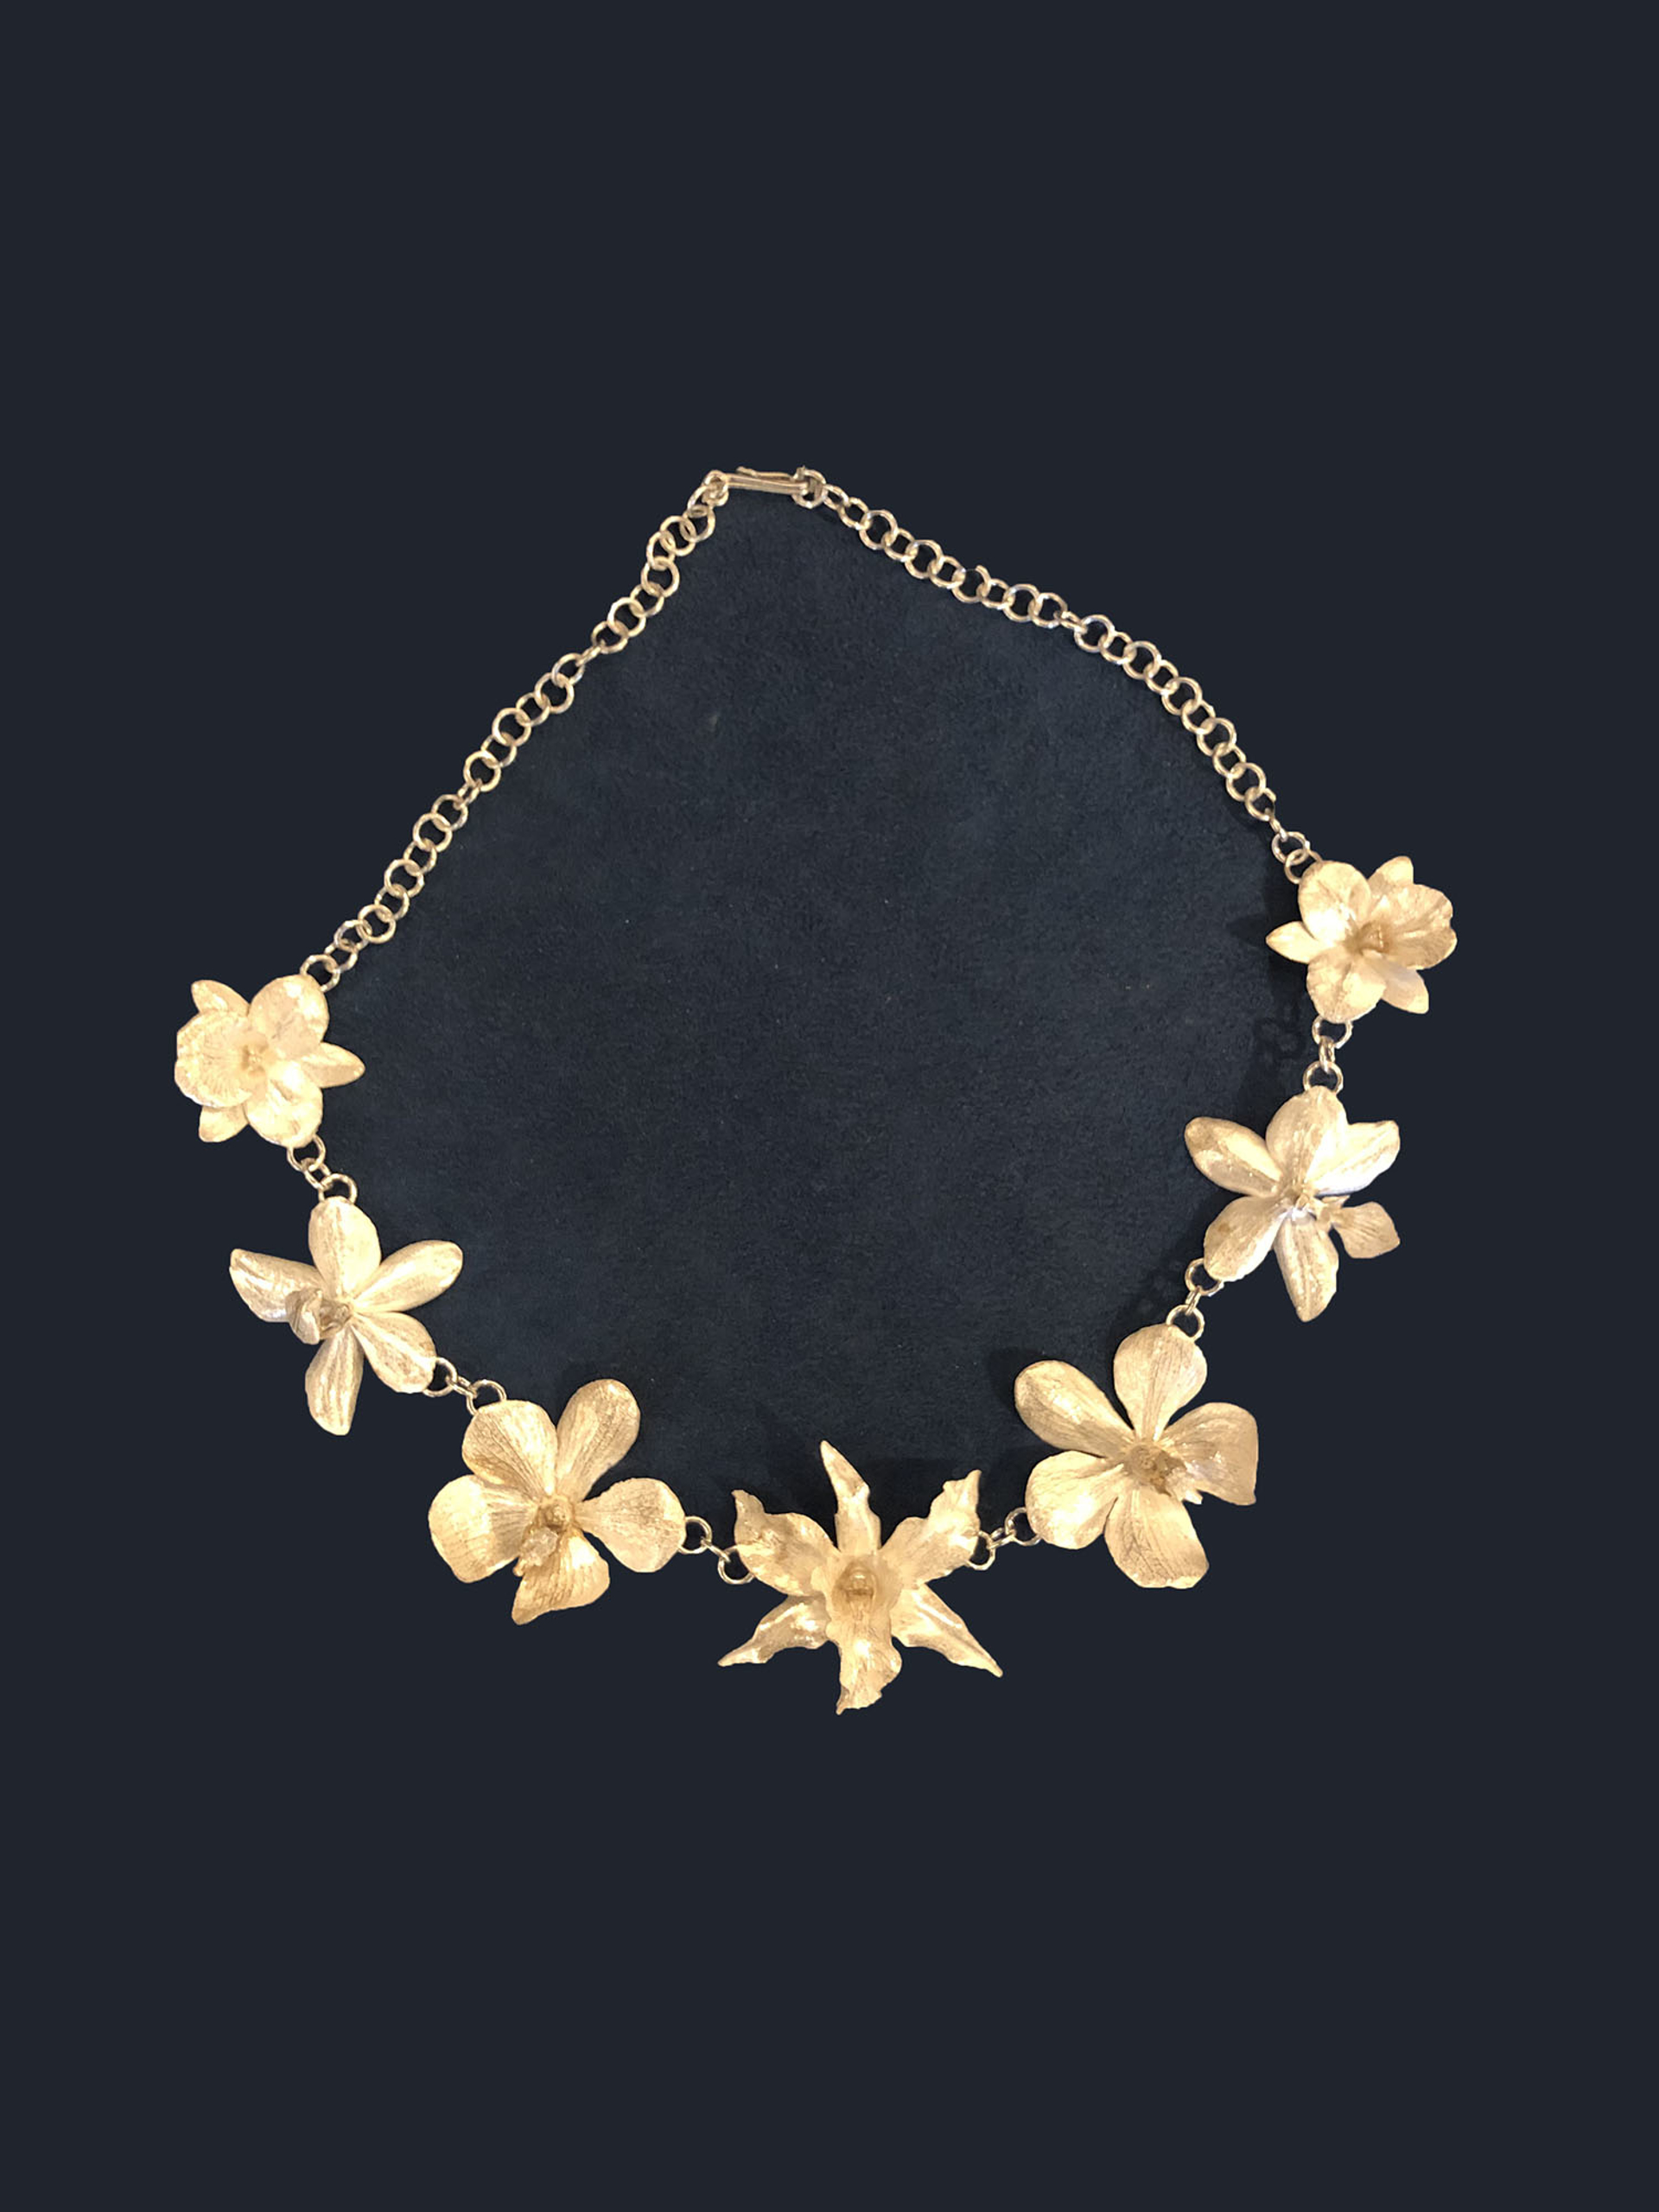 Seven LG Orchid Necklace by Wayne Keeth